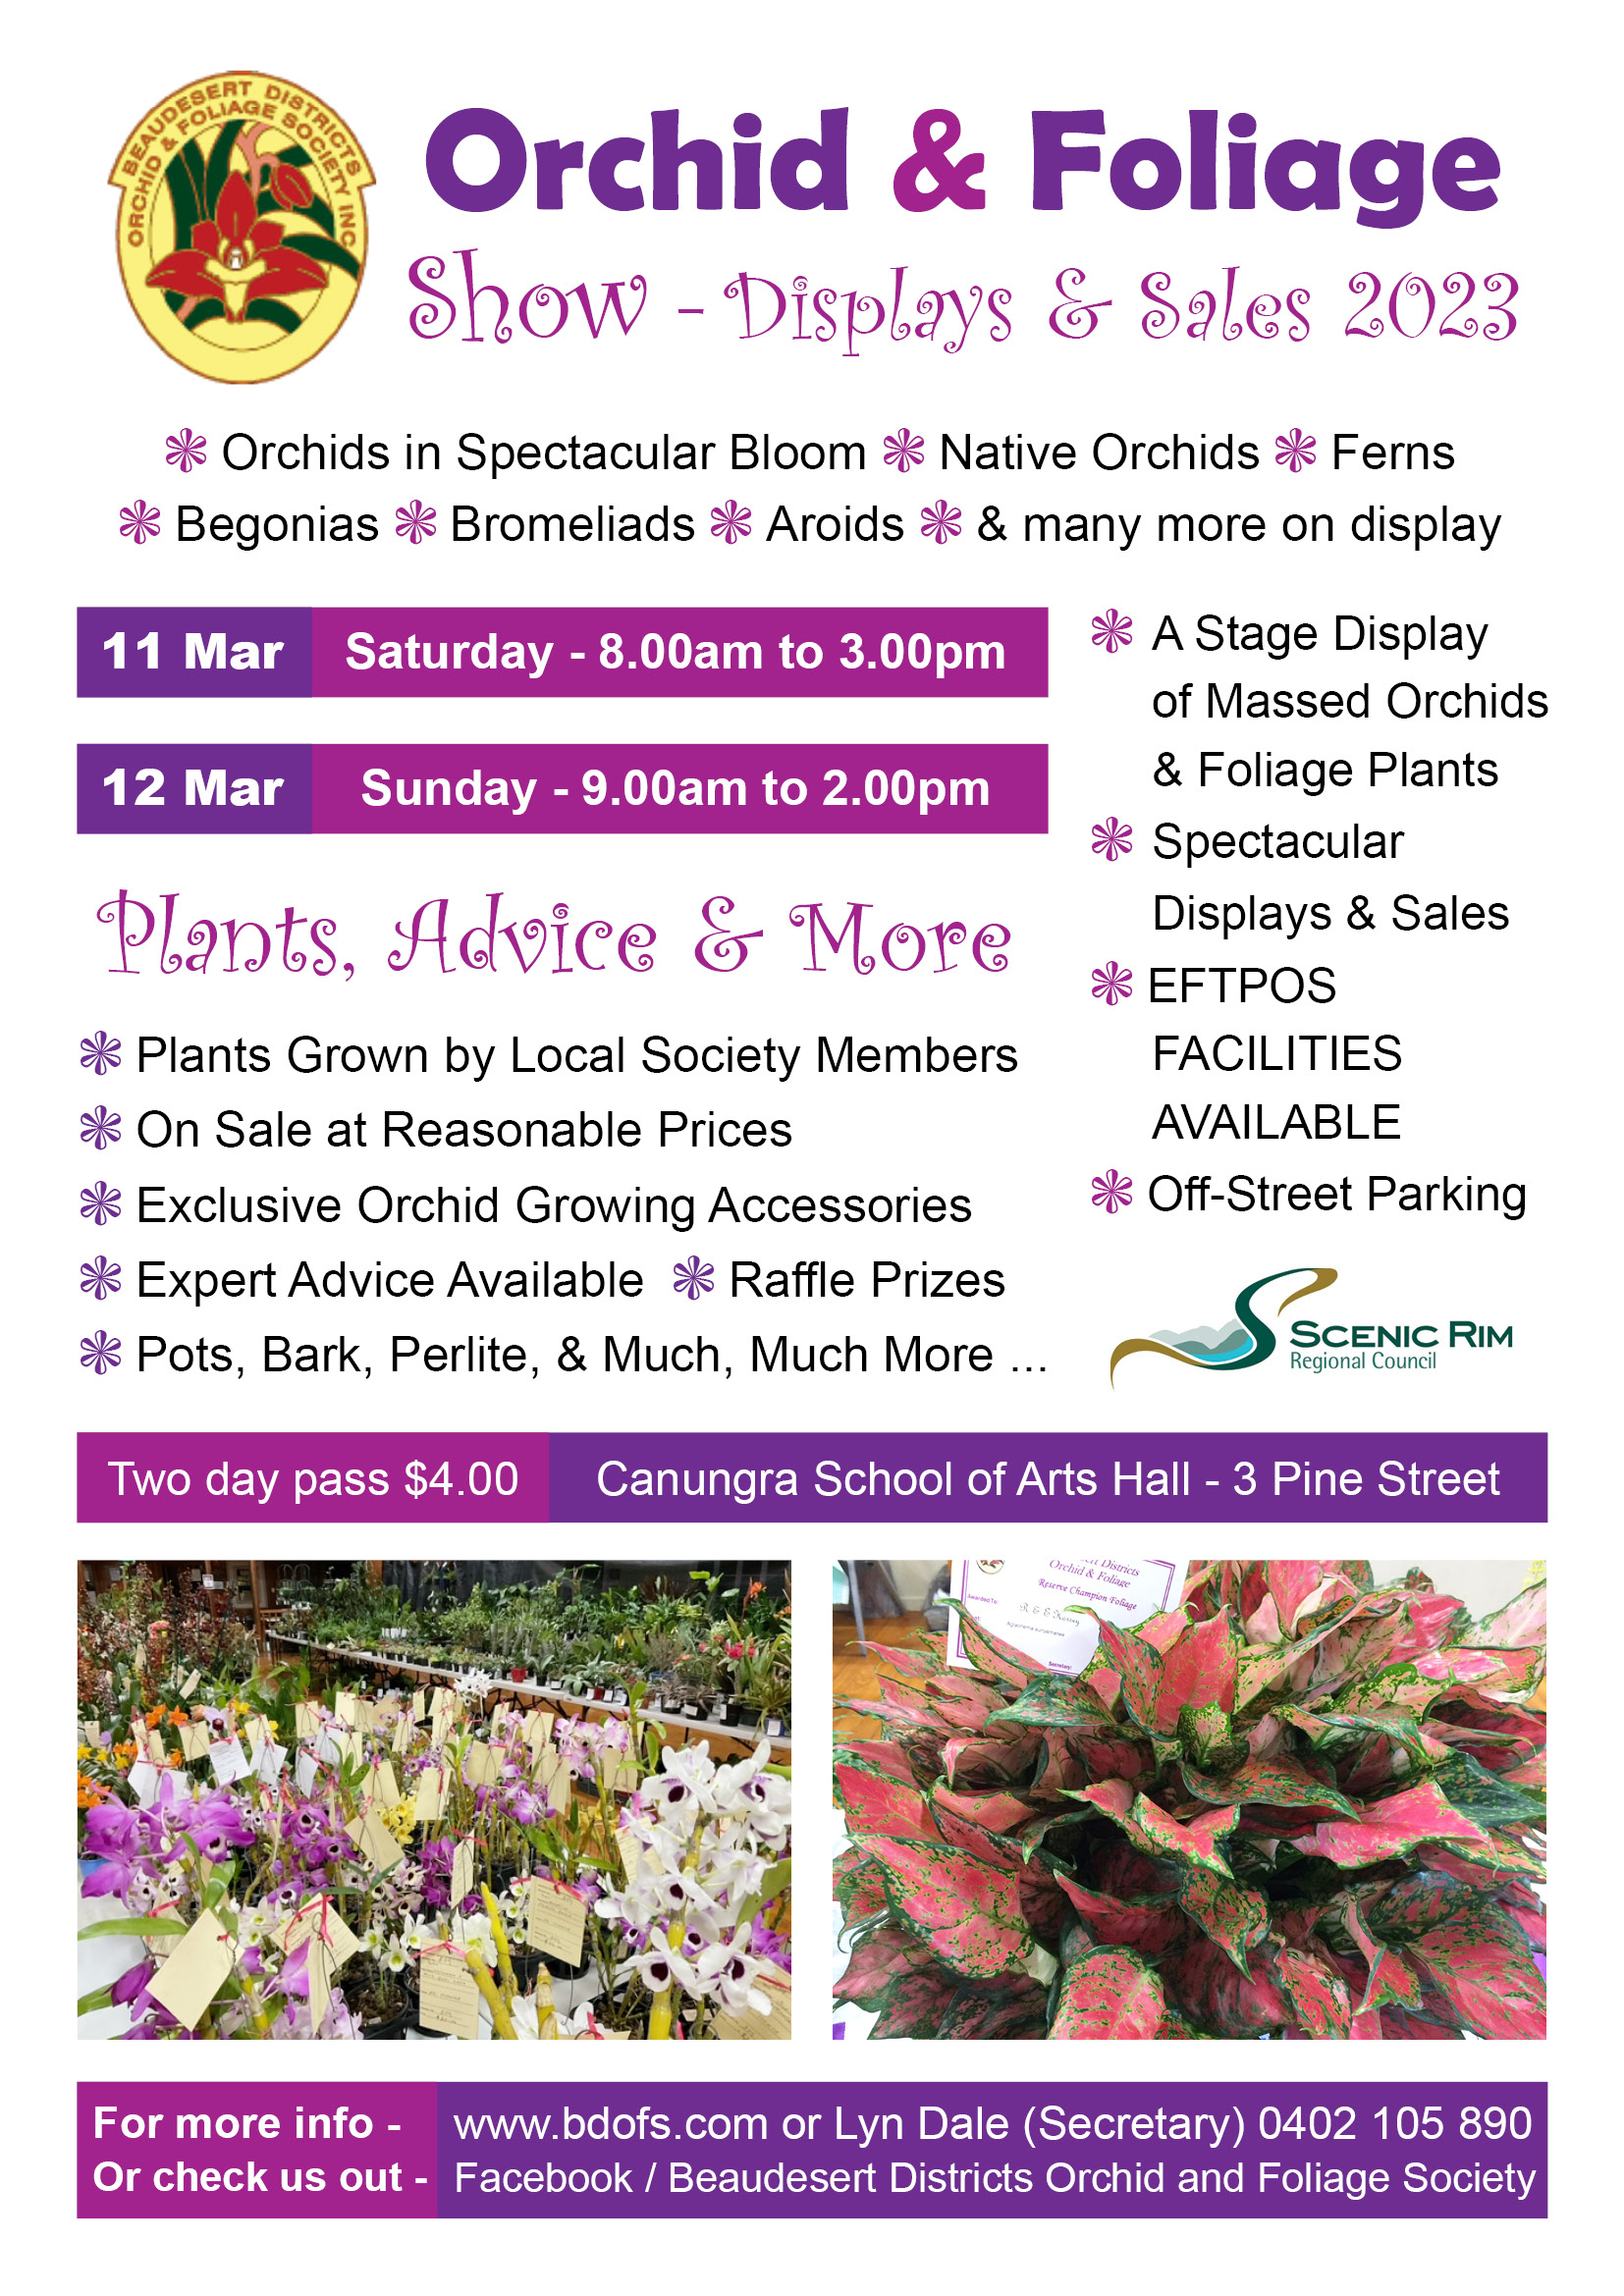 Orchid & Foliage Show - Display & Sales 2023